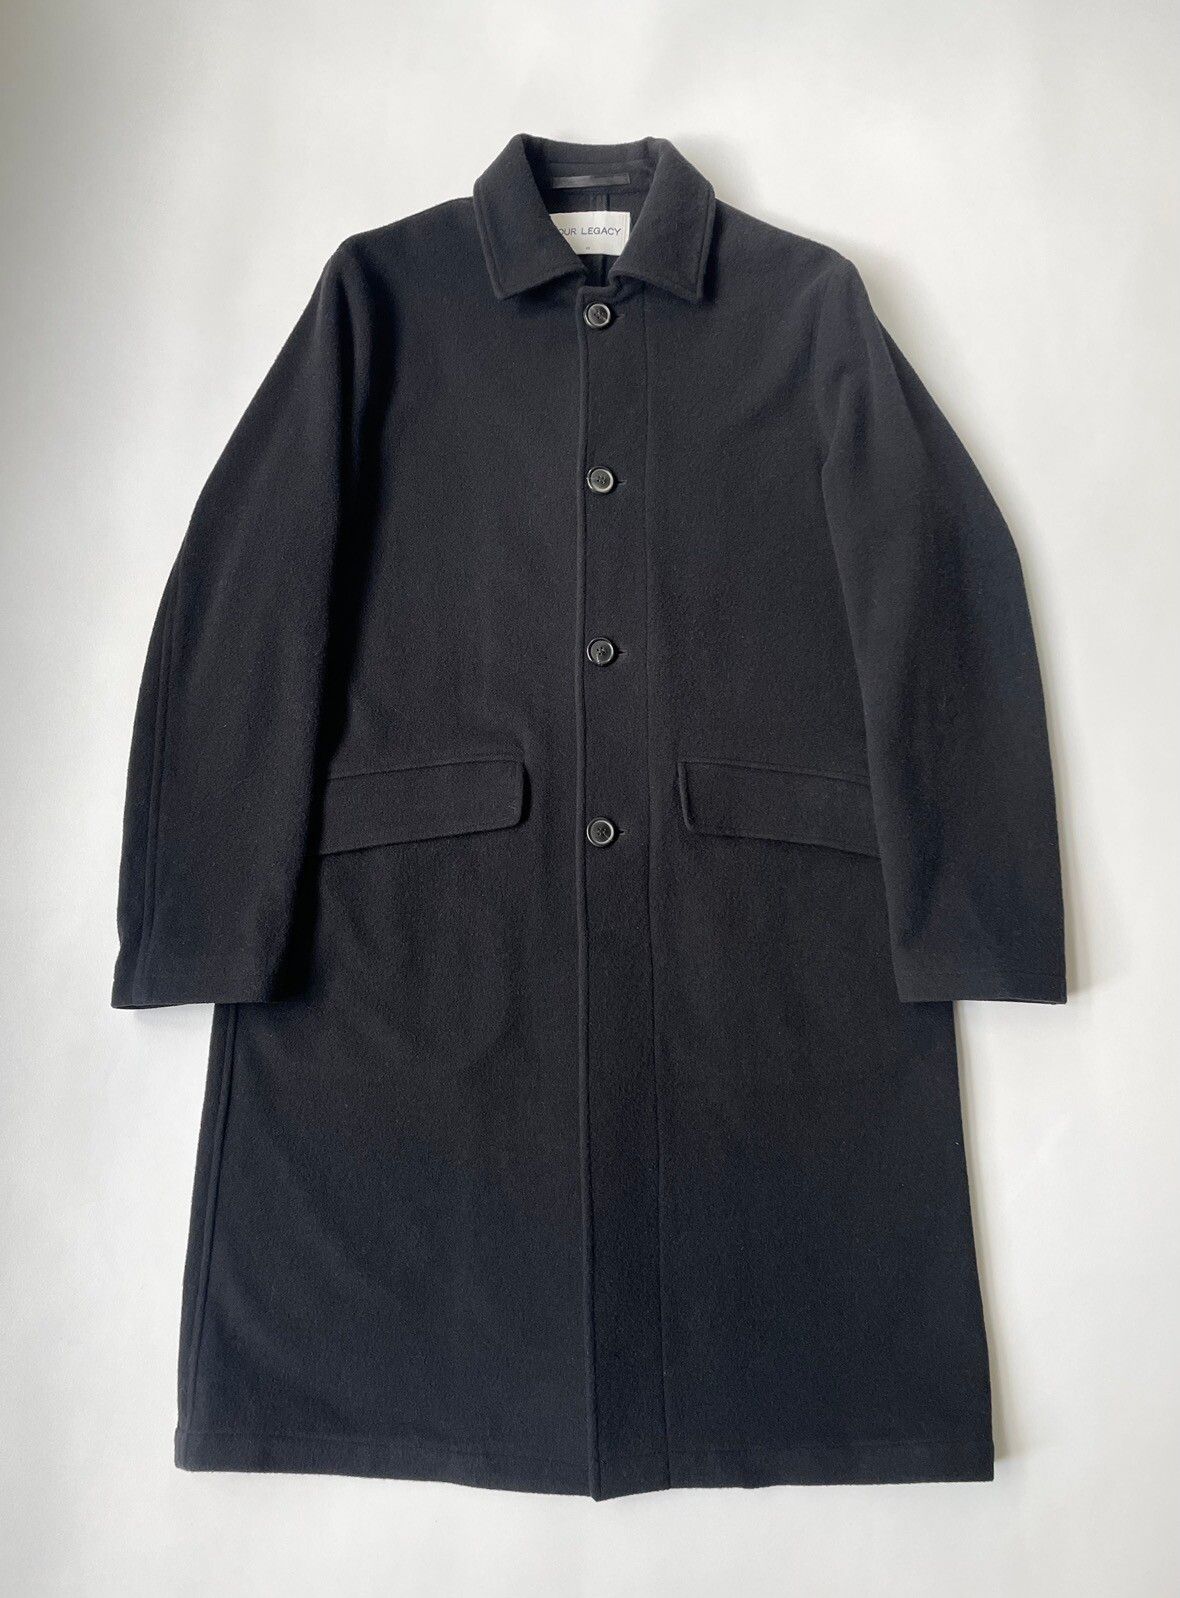 Pre-owned Our Legacy Boxy Fit Black Wool Overcoat